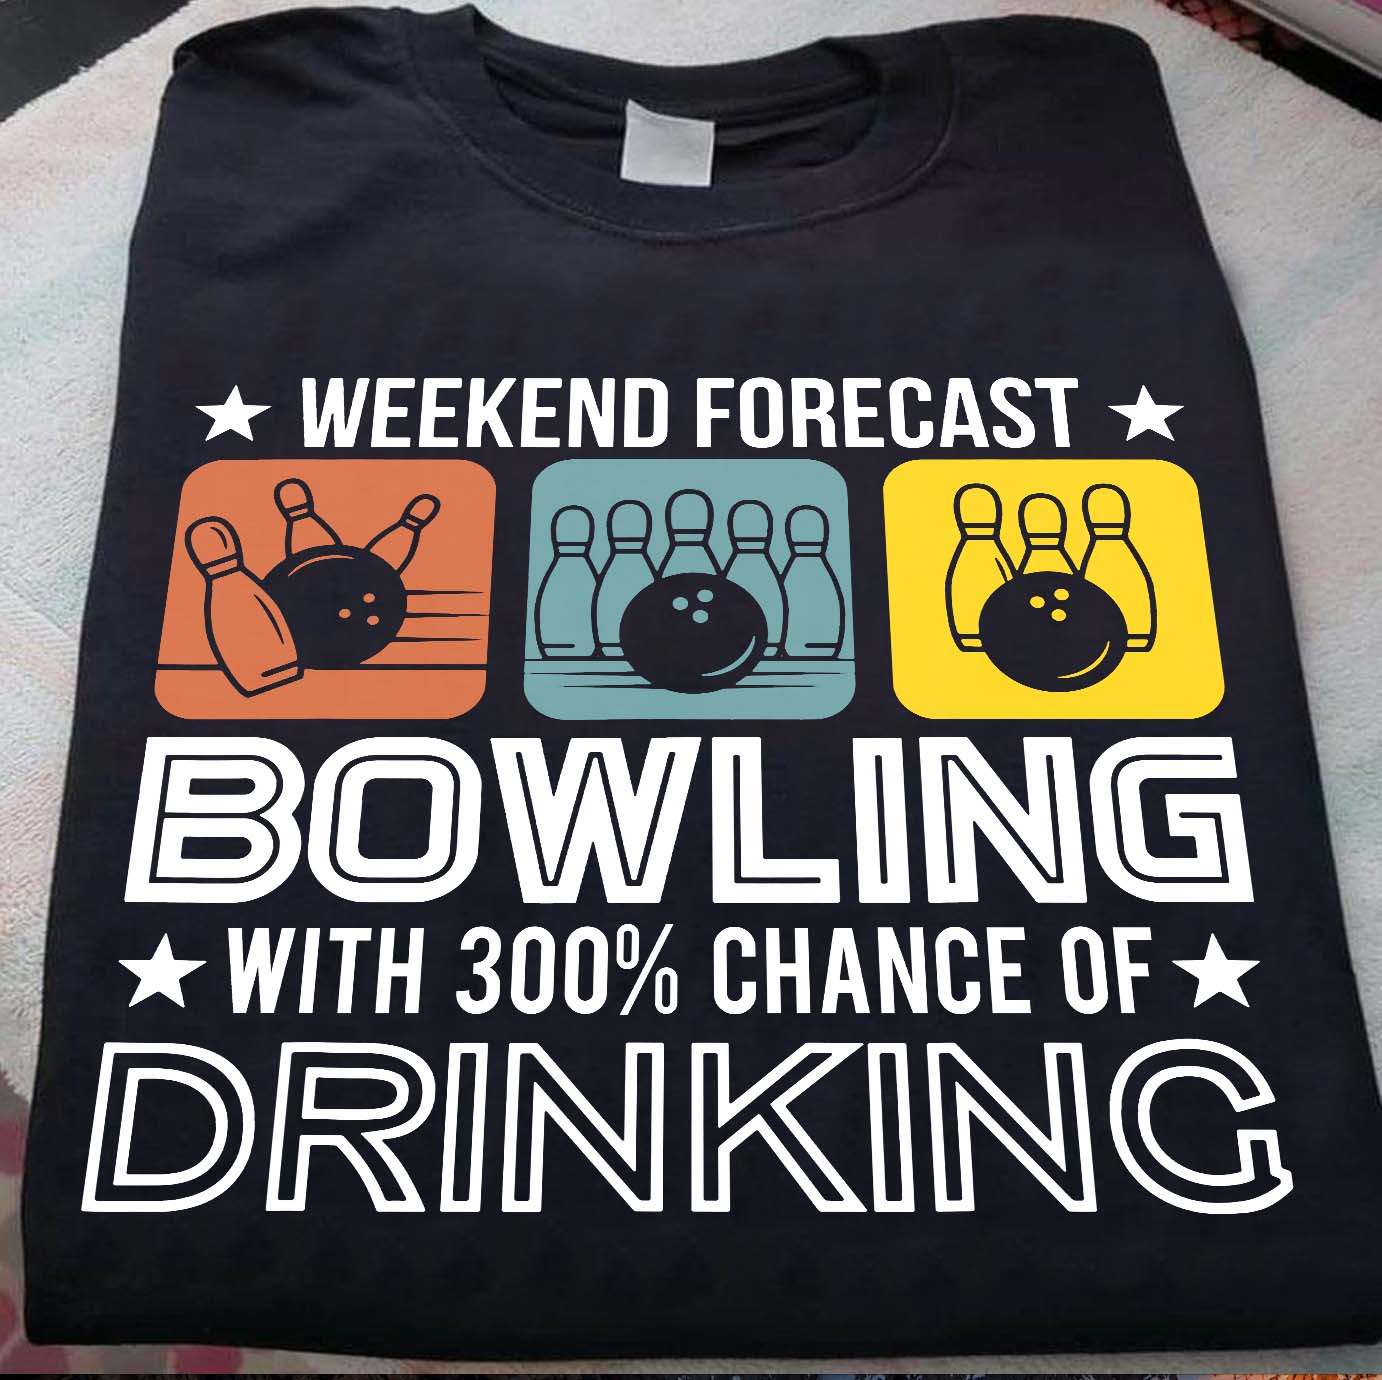 Bowling Lover - Weekend forecast bowling with 300% chance of drinking